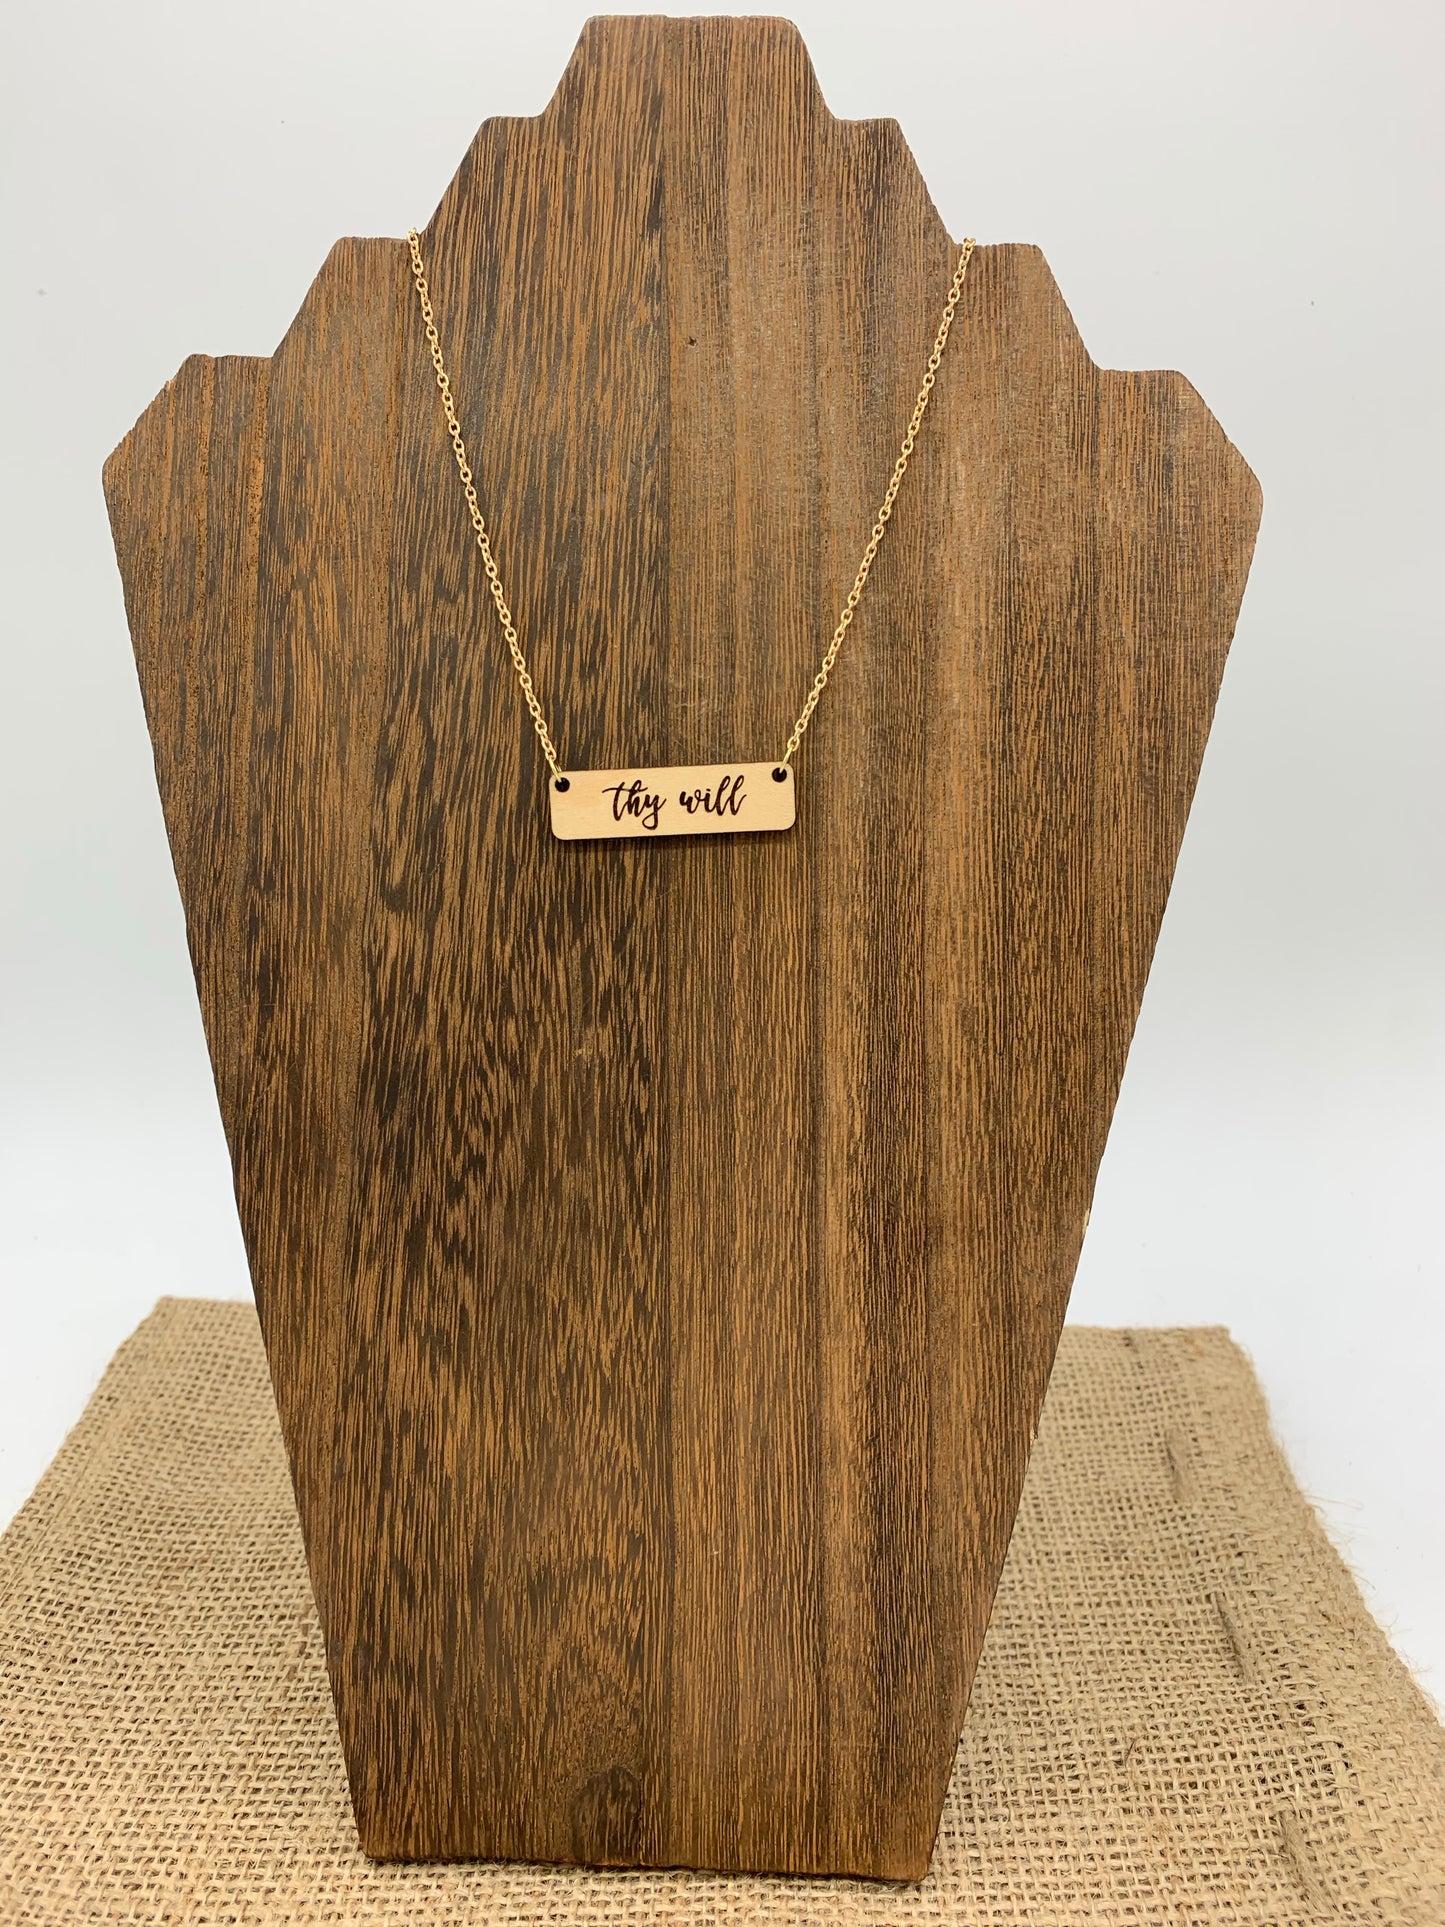 Thy Will laser engraved 14 inch necklace